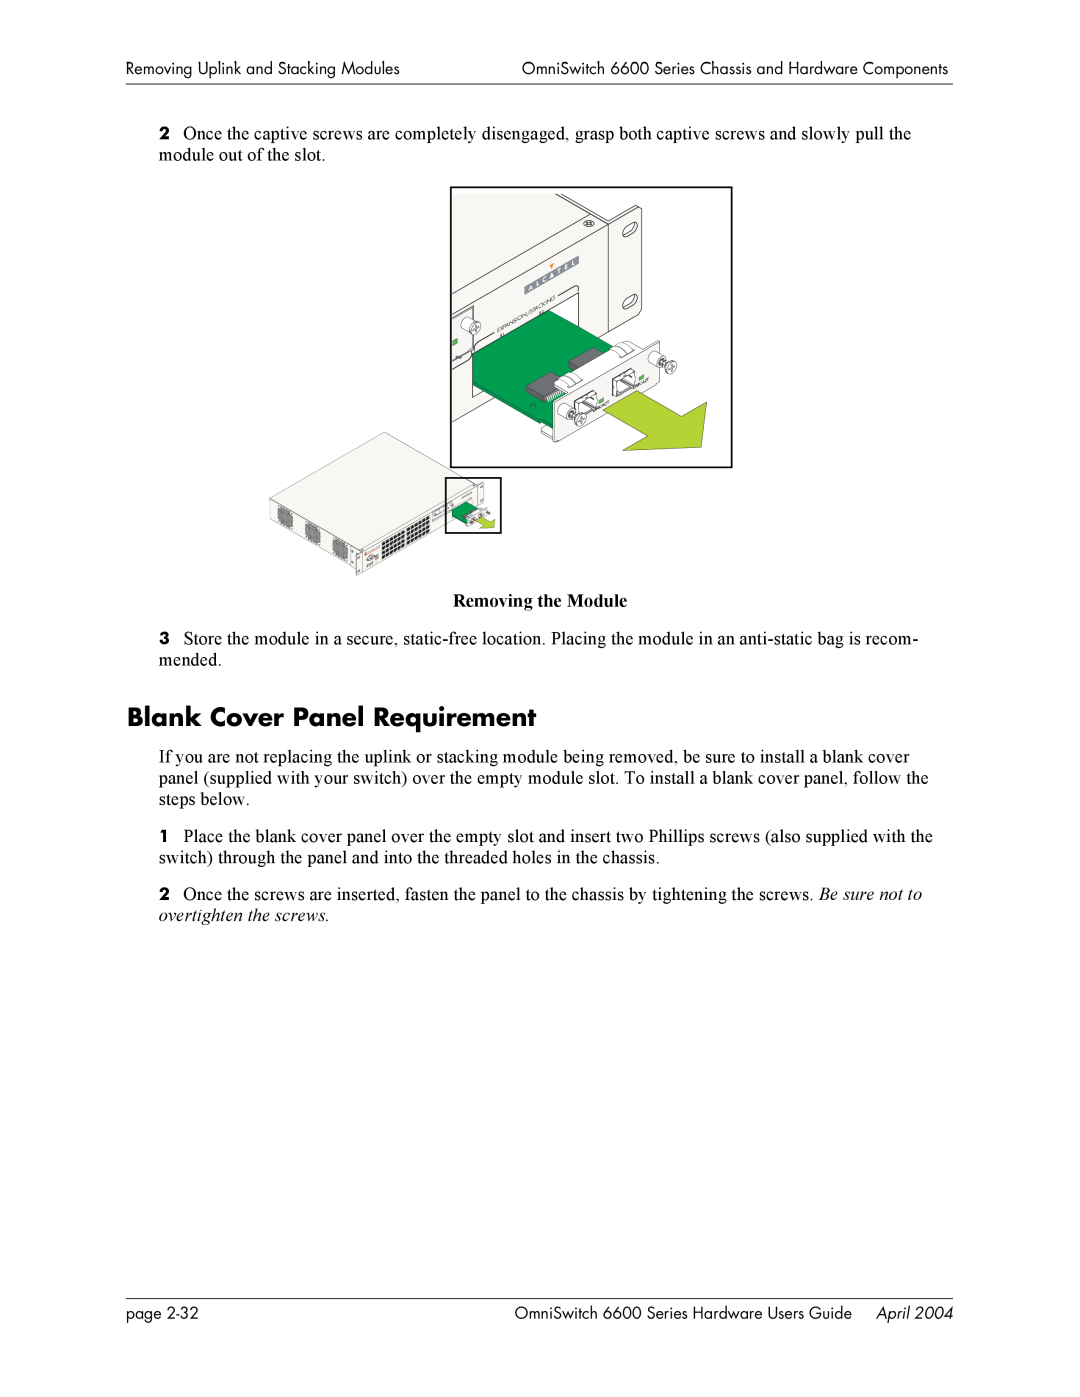 Alcatel-Lucent 6624, 6648, 6600 Series manual Removing the Module, Blank Cover Panel Requirement 